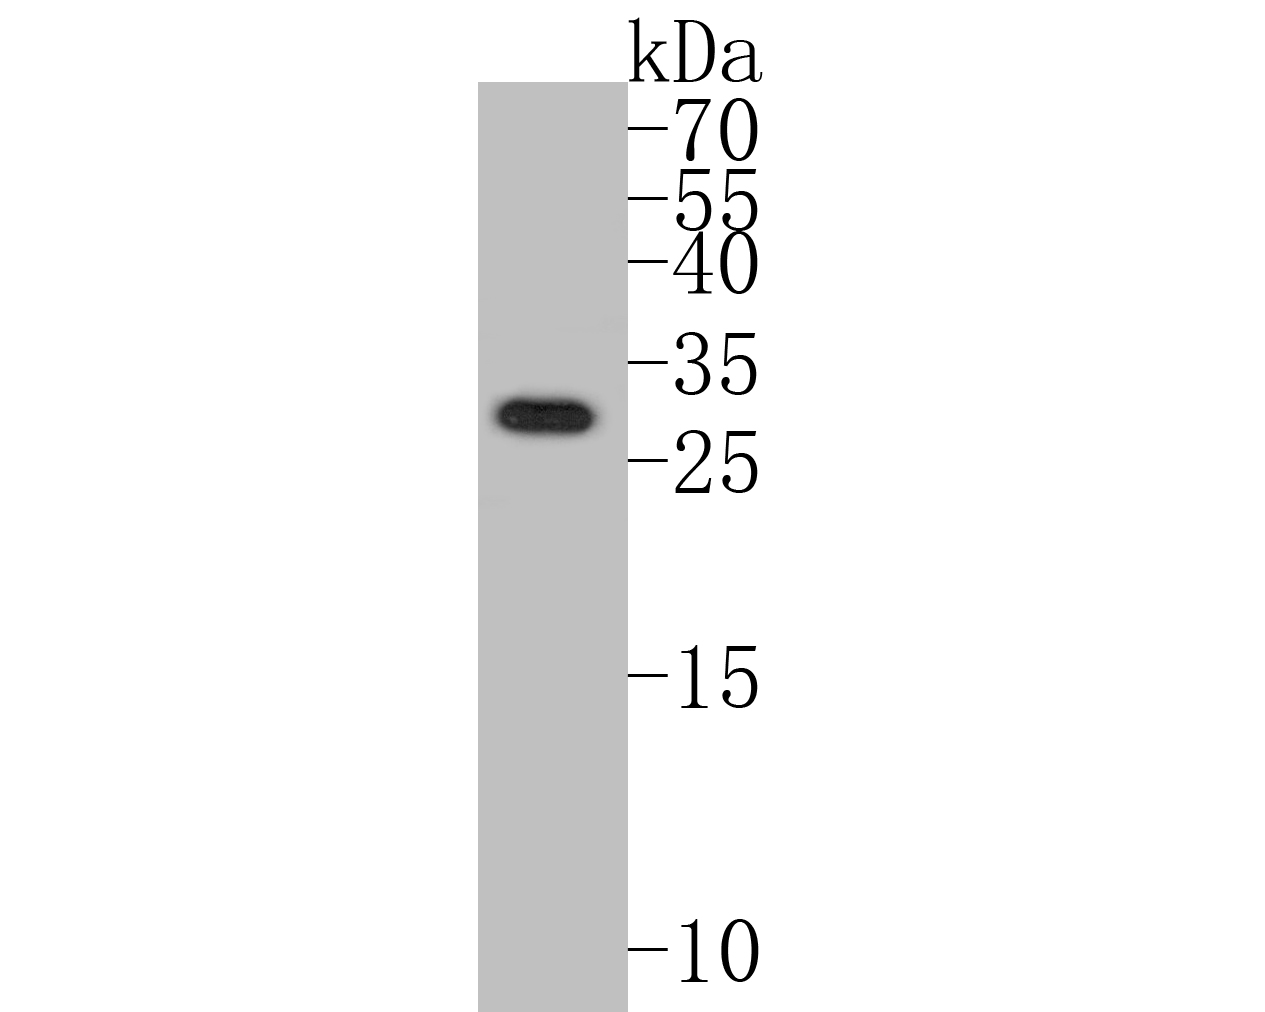 Western blot analysis of TMEM163 on human small intestine tissue lysates. Proteins were transferred to a PVDF membrane and blocked with 5% BSA in PBS for 1 hour at room temperature. The primary antibody (ER1901-87, 1/500) was used in 5% BSA at room temperature for 2 hours. Goat Anti-Rabbit IgG - HRP Secondary Antibody (HA1001) at 1:5,000 dilution was used for 1 hour at room temperature.